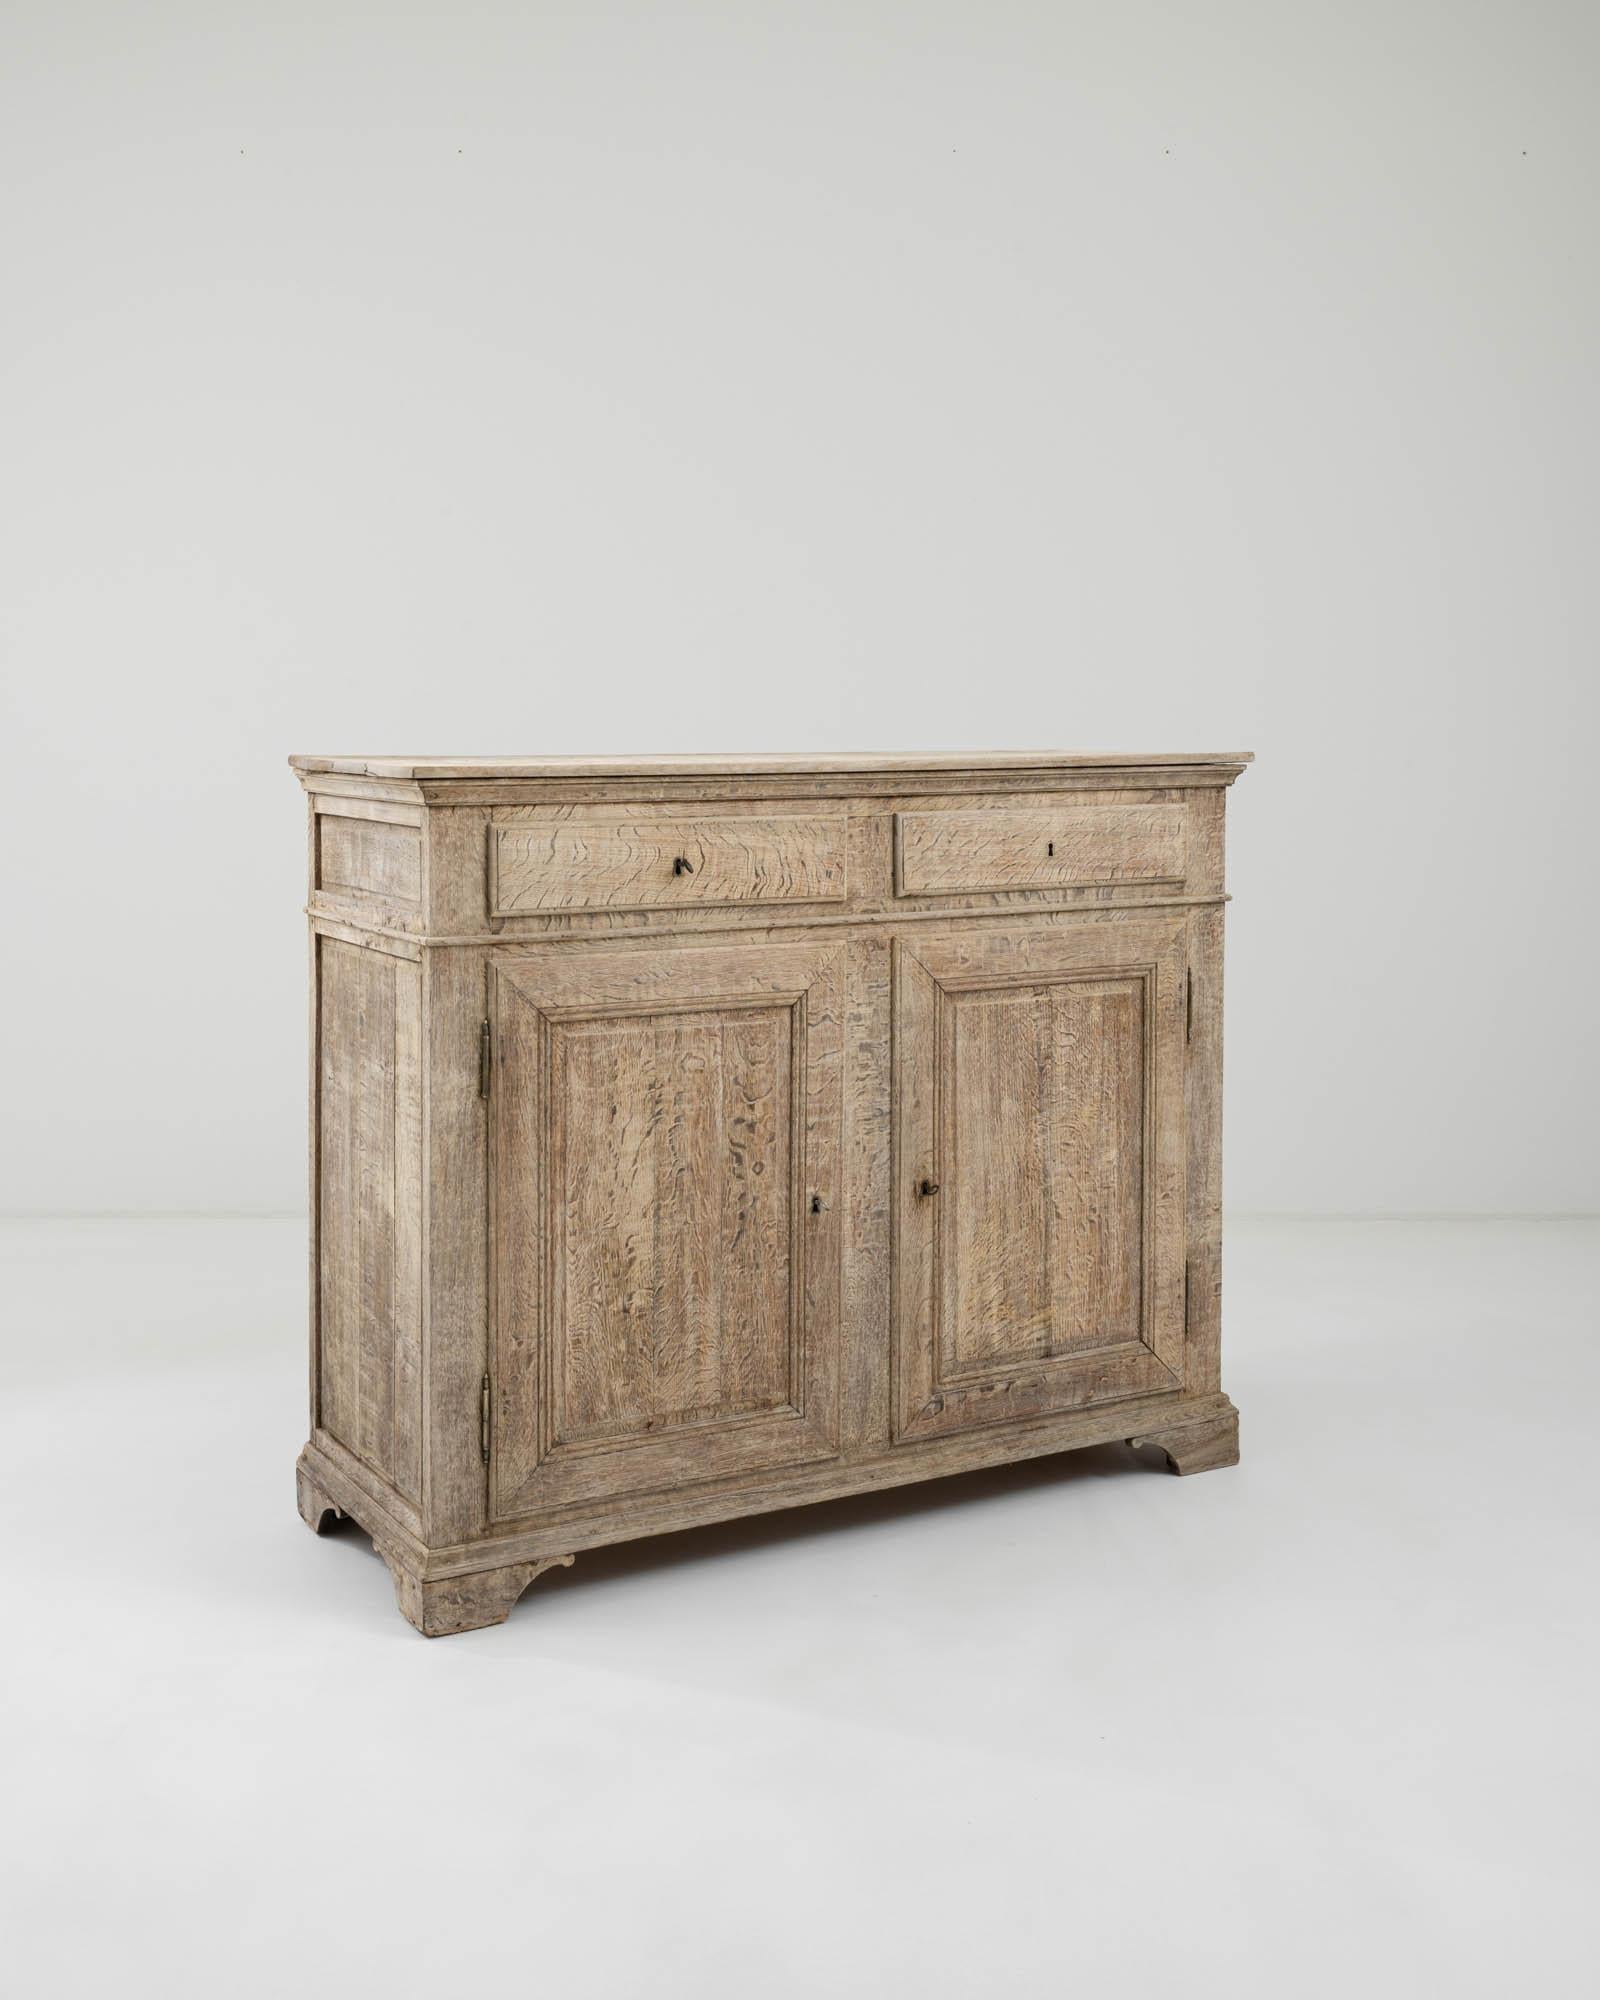 The quintessential Country French buffet cabinet, made circa 1900. The simple geometric shape recalls a countryside local and the time tested approach of regional French cabinet makers. Combining earthy colors and elevated craftsmanship, this buffet